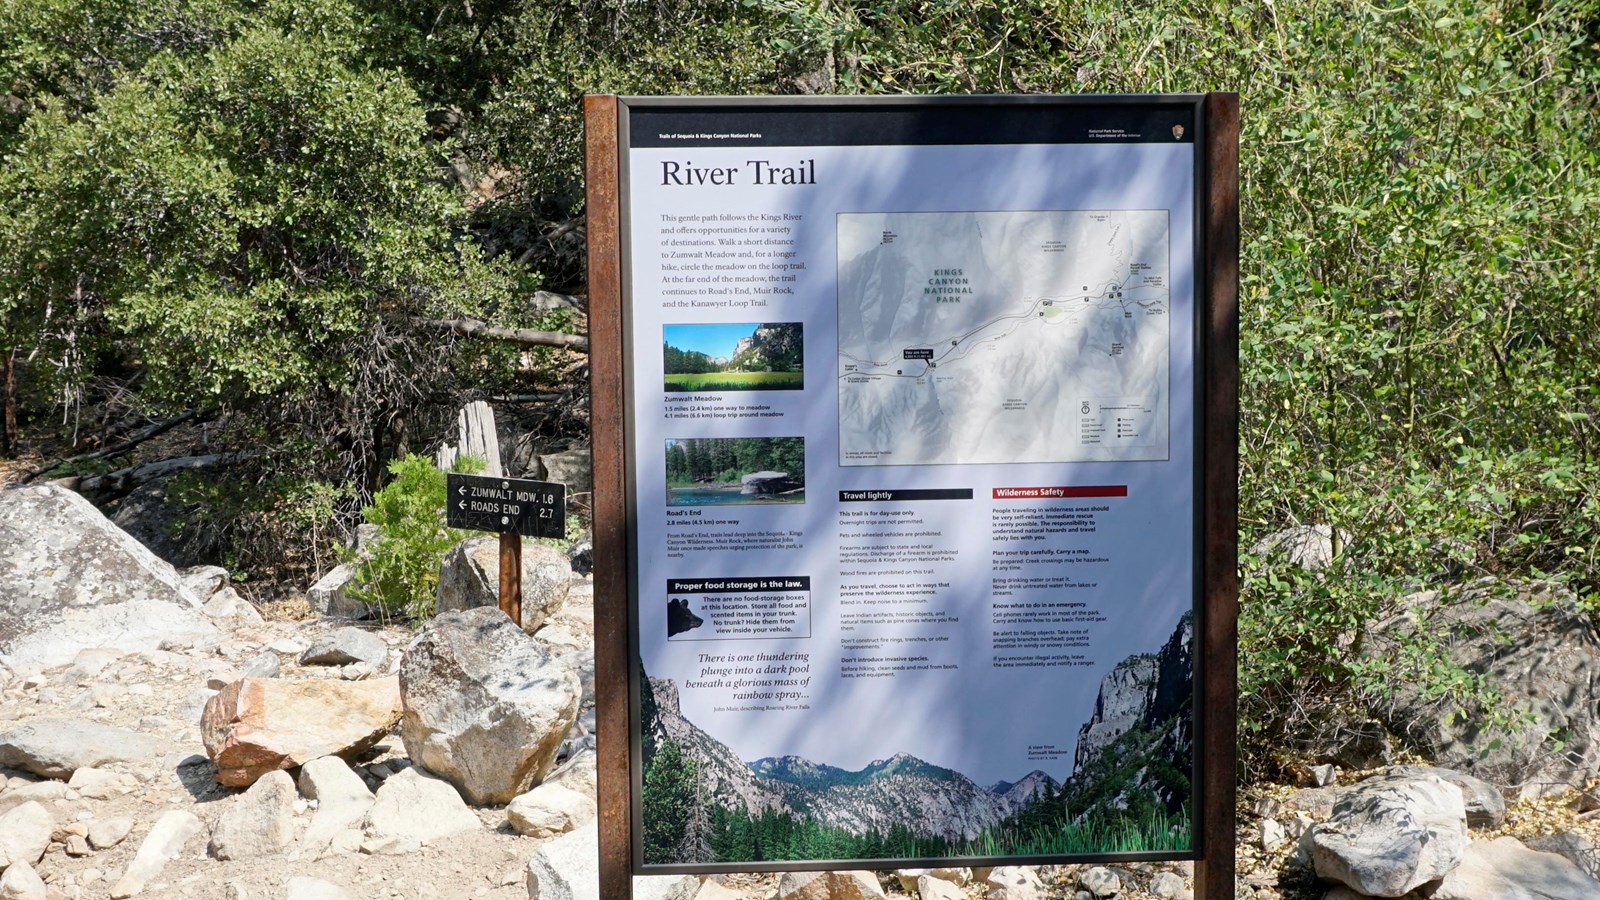 A metal panel has text and images on it with information about the river trail